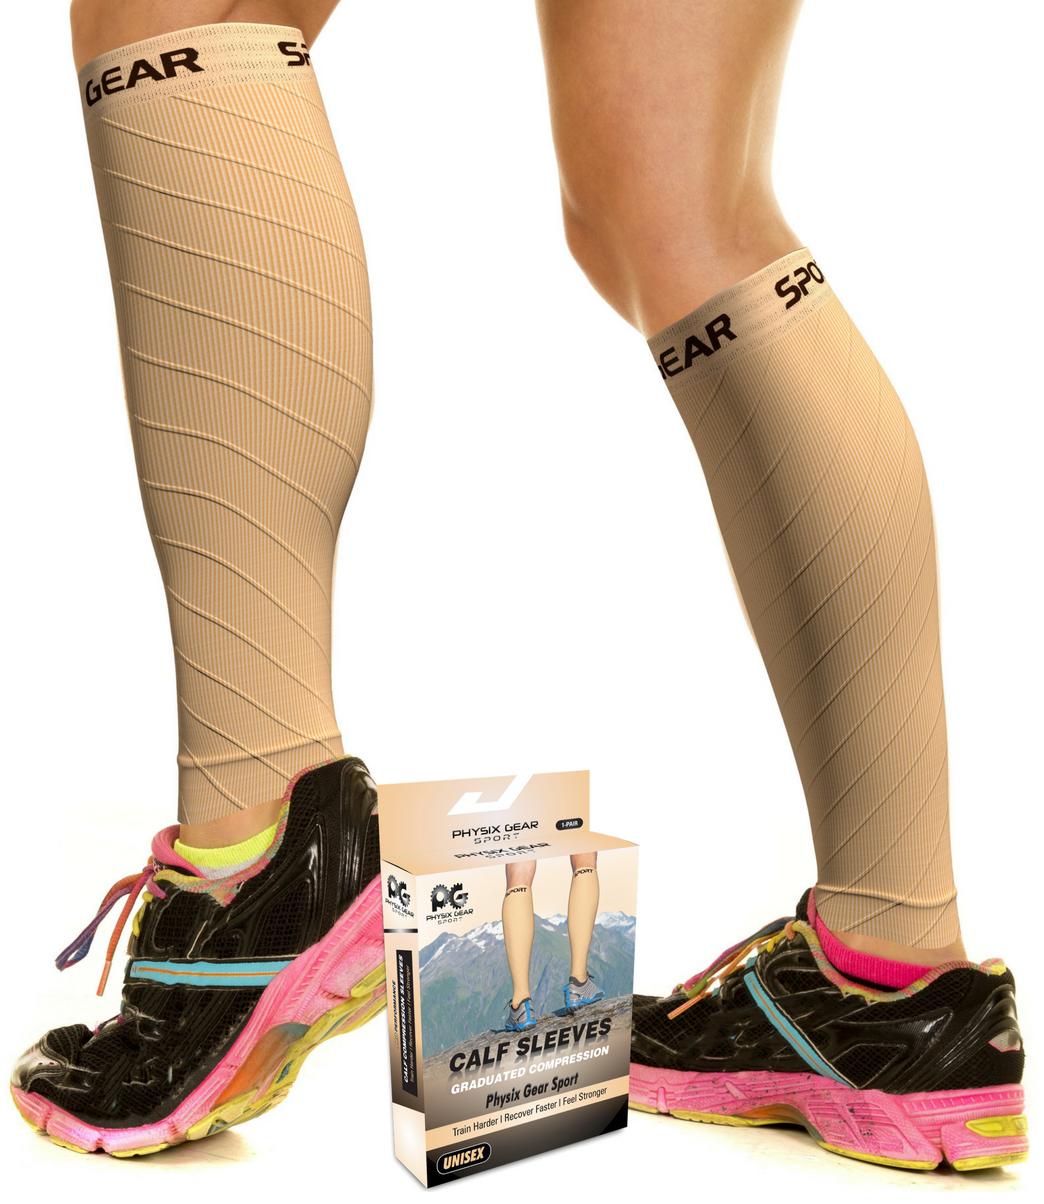 Calf Compression Sleeves - Leg Compression Socks for Runners